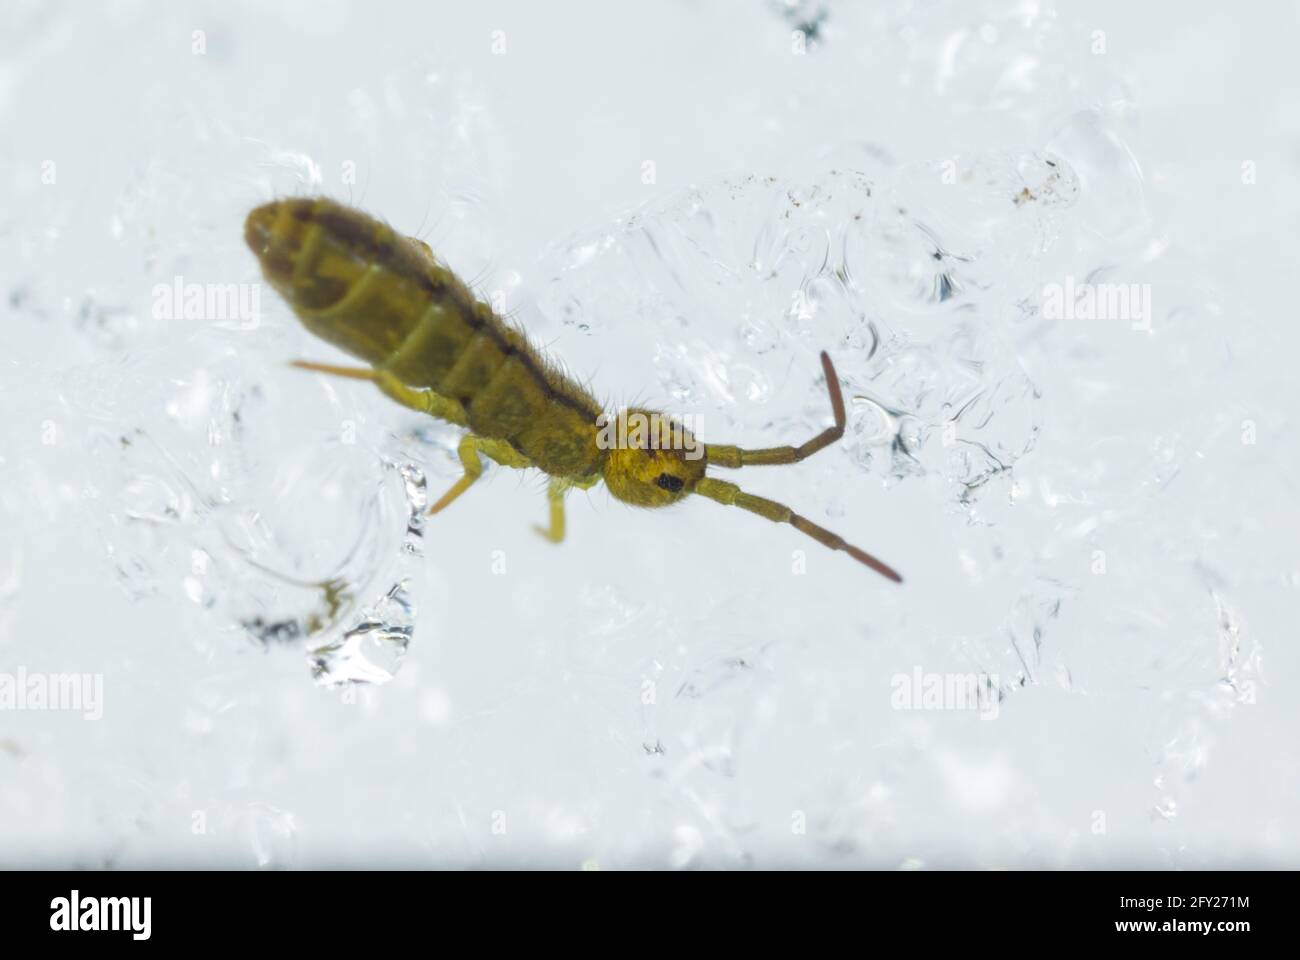 Elongate-bodied springtail (Isotoma sp) walking on snow during winter Stock Photo